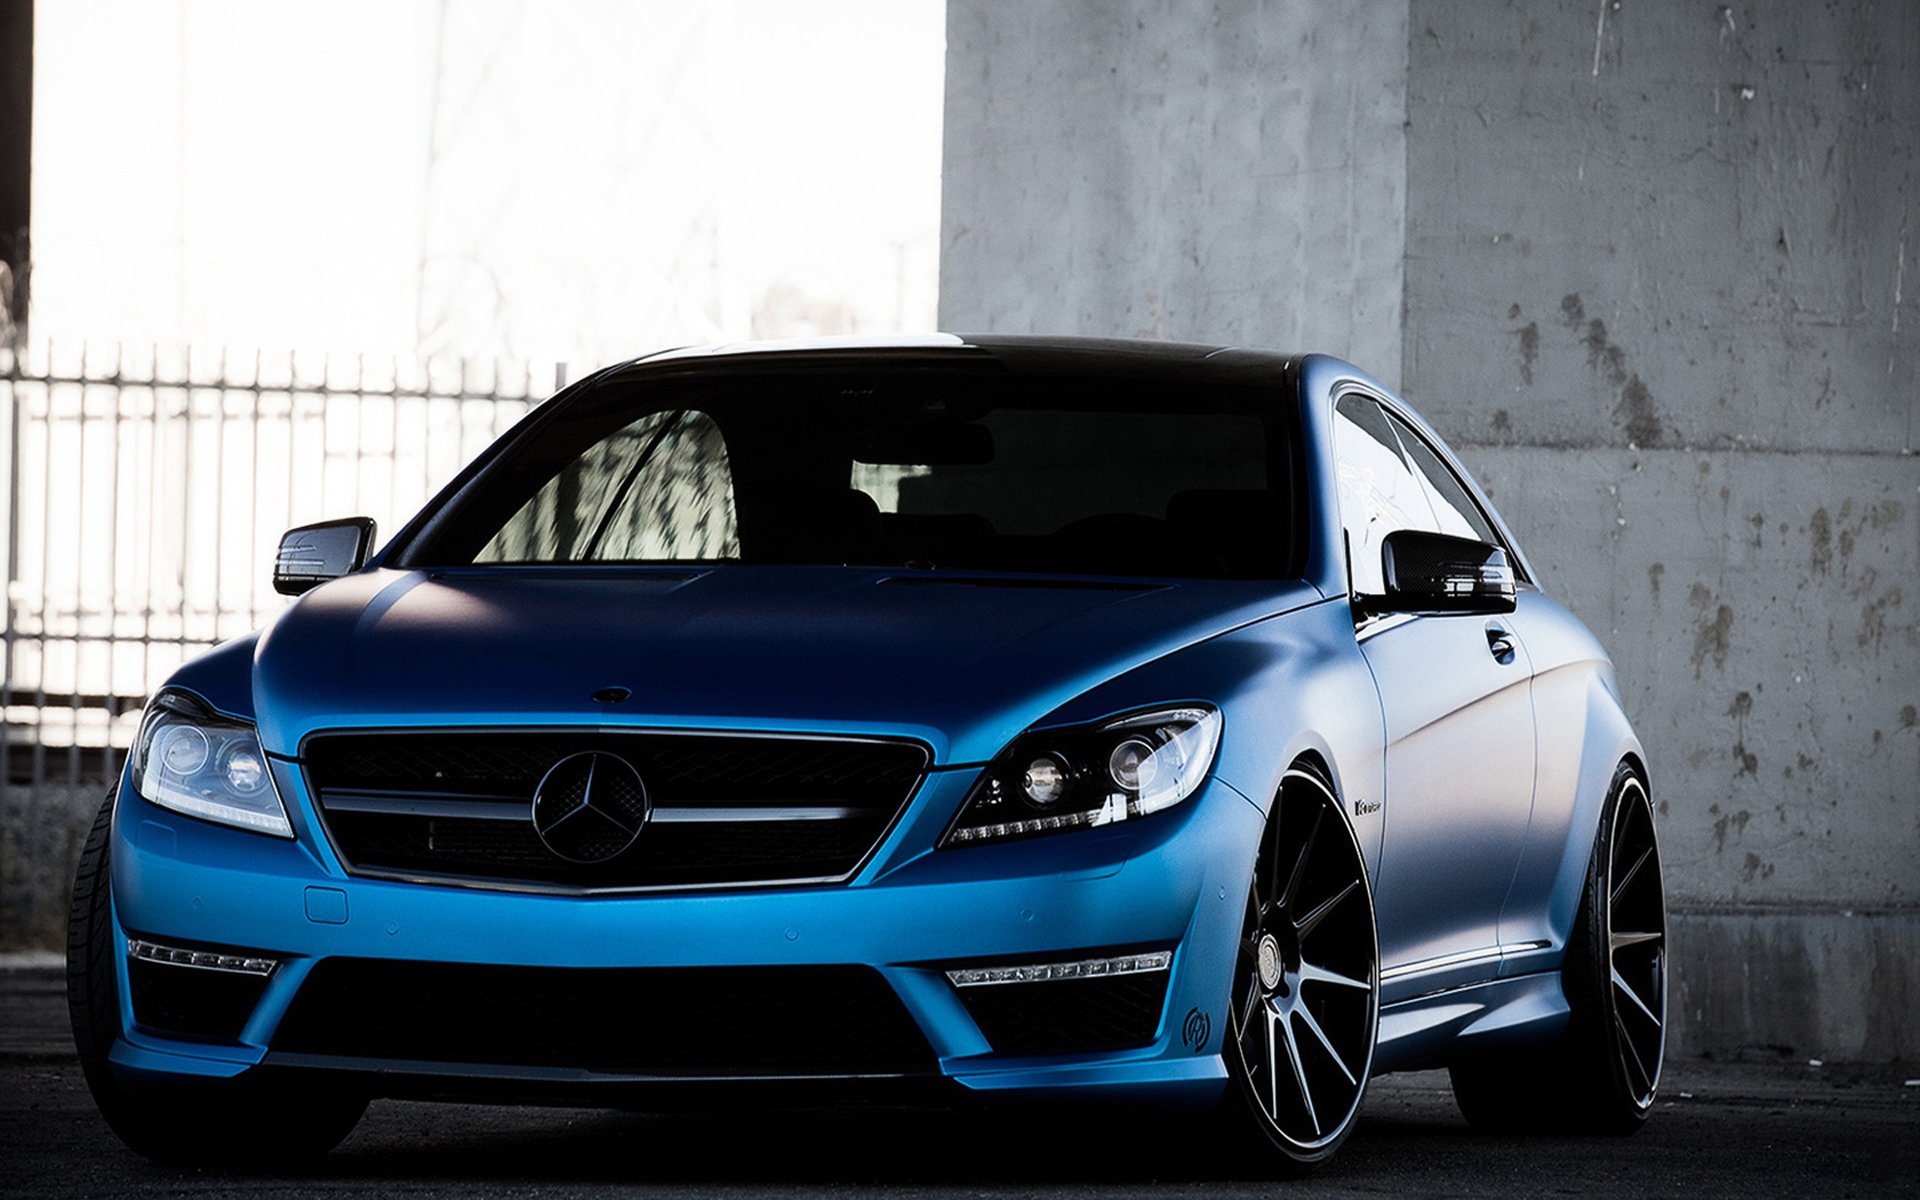 Wallpapers mercedes benz coupe on the desktop